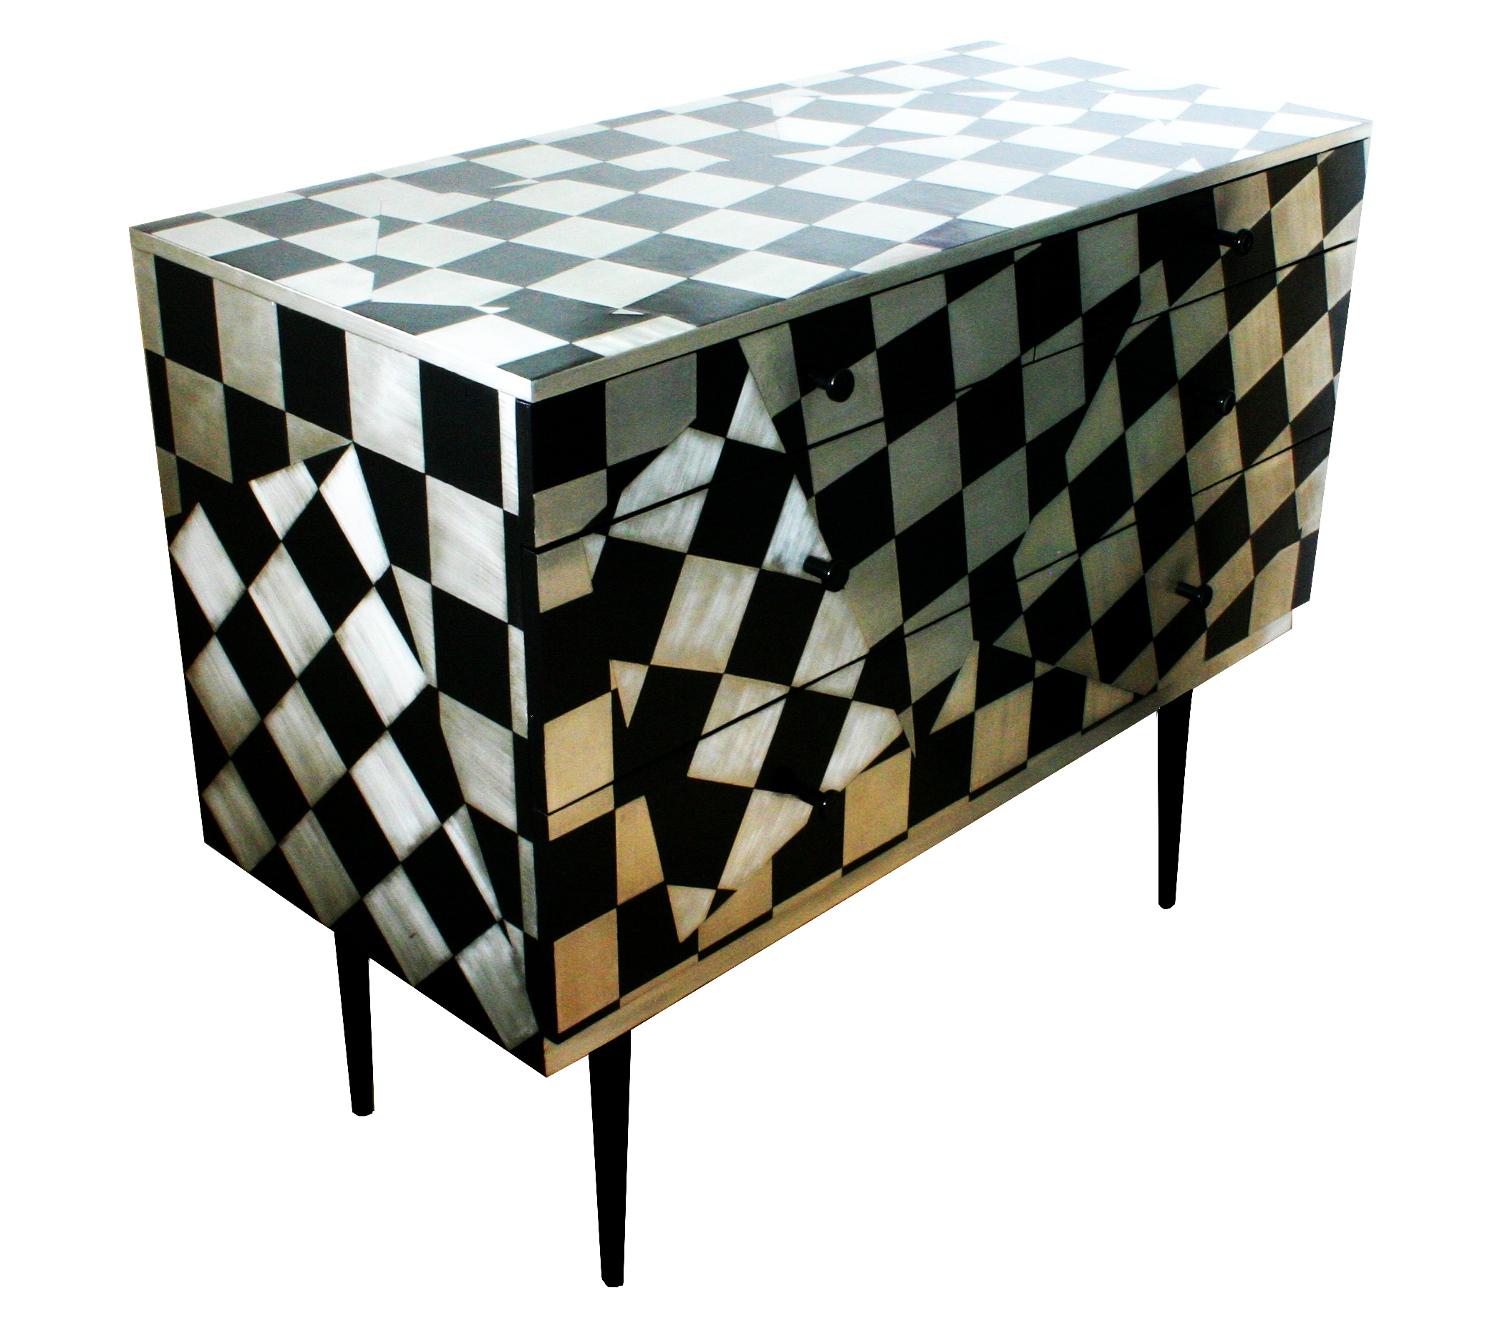 'Checkometry' is a design inspired by a Foale &Tuffin suit at the V&A.

A mid to late Twentieth Century chest of drawers that has been reconditioned and reimagined by designer and maker Kate Noakes. Kate uses a unique process that she has developed